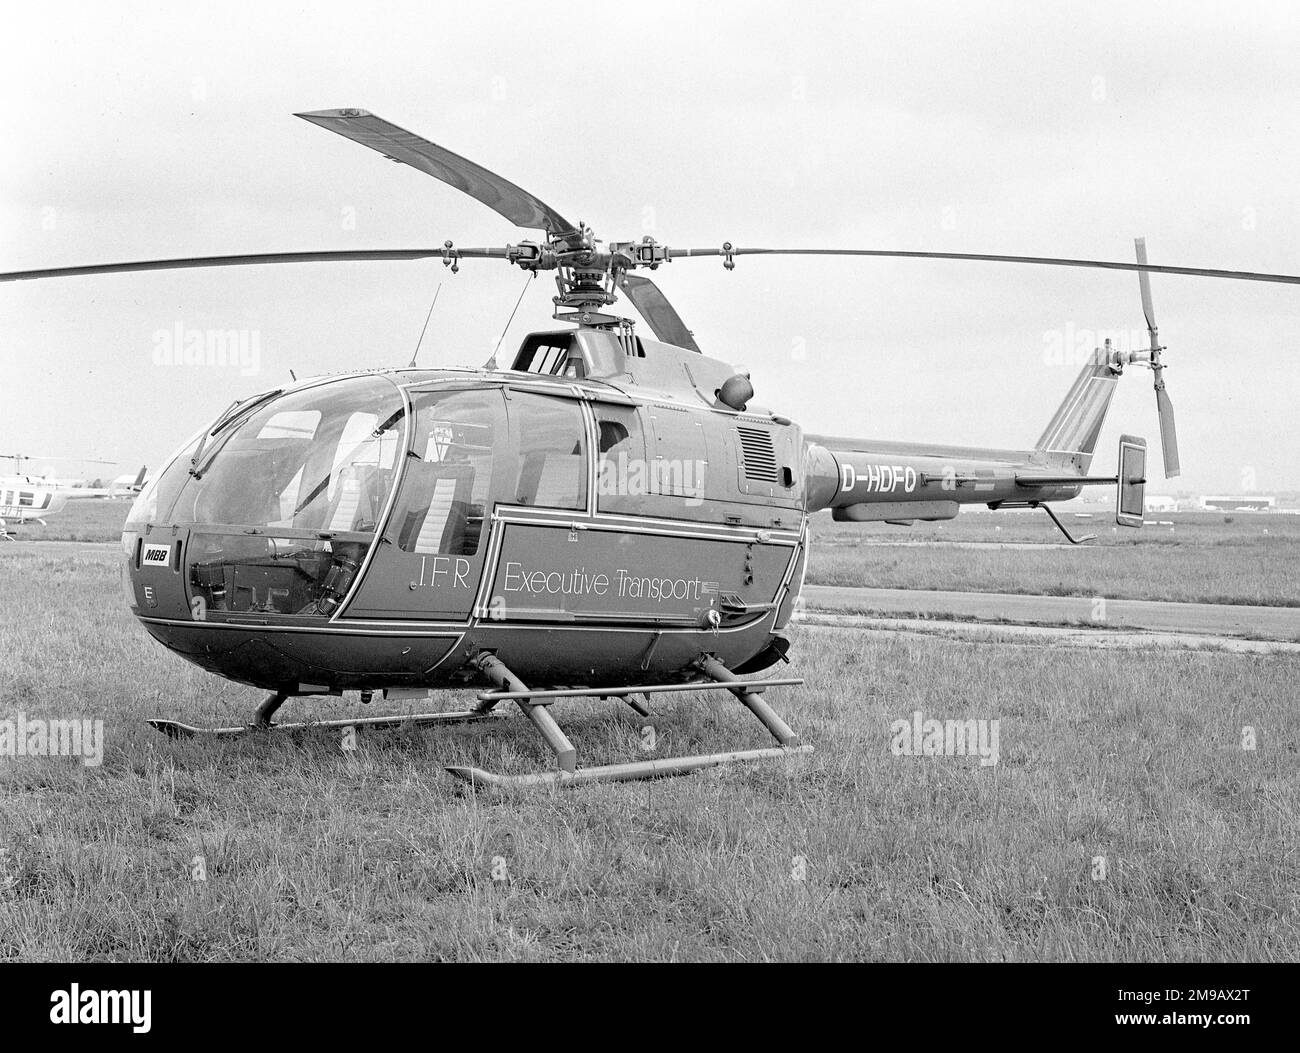 MBB Bo 105C D-HDFQ (msn S-179), of I.F.R. Executive Transport, at the Paris Air Show in 19 June 1977 at Le Bourget Airport, used for Army VIP transport. Stock Photo